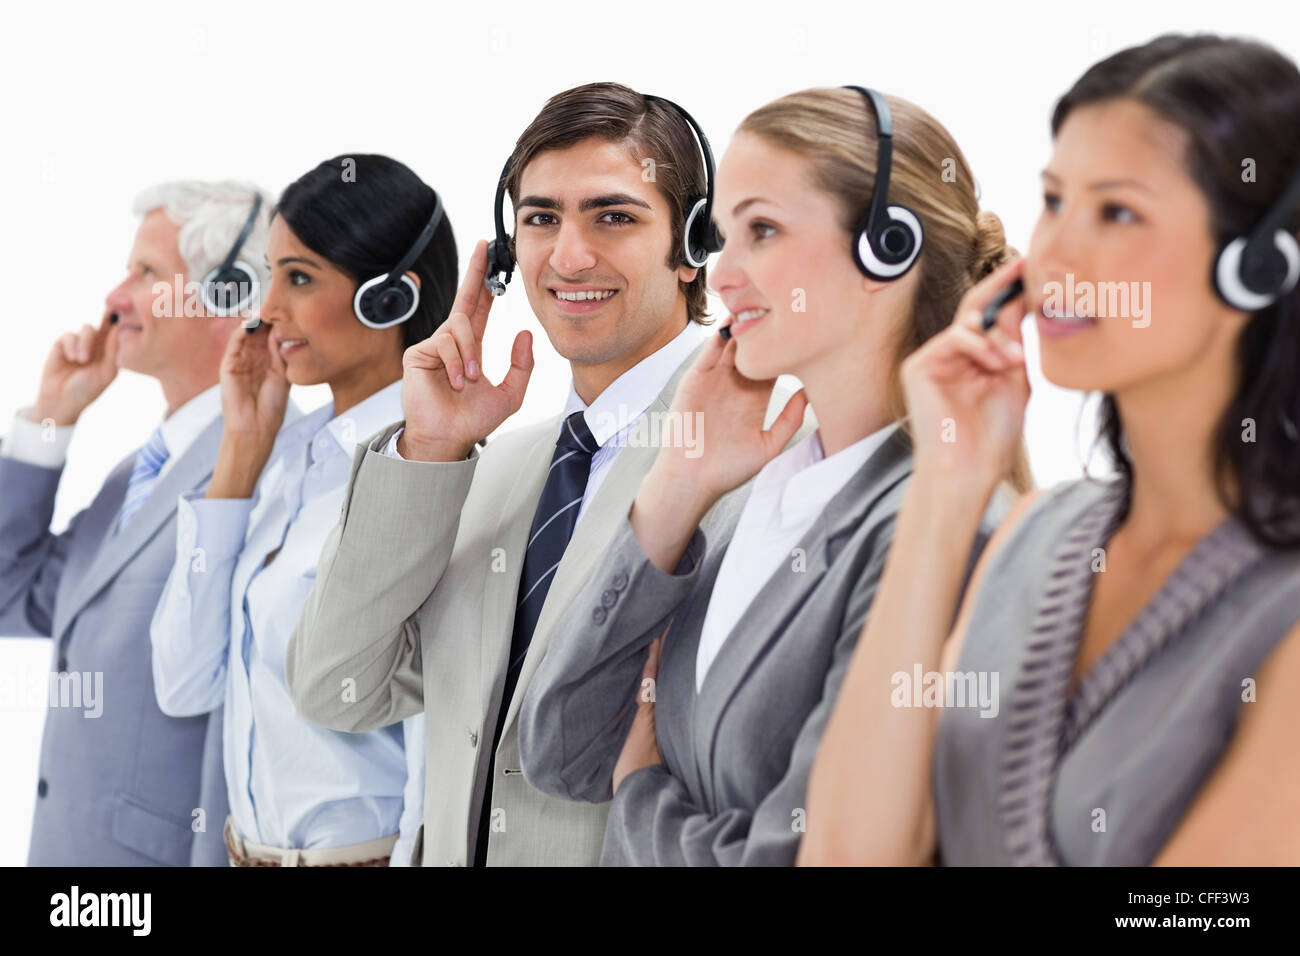 Close-up of professionals in suits listening Stock Photo